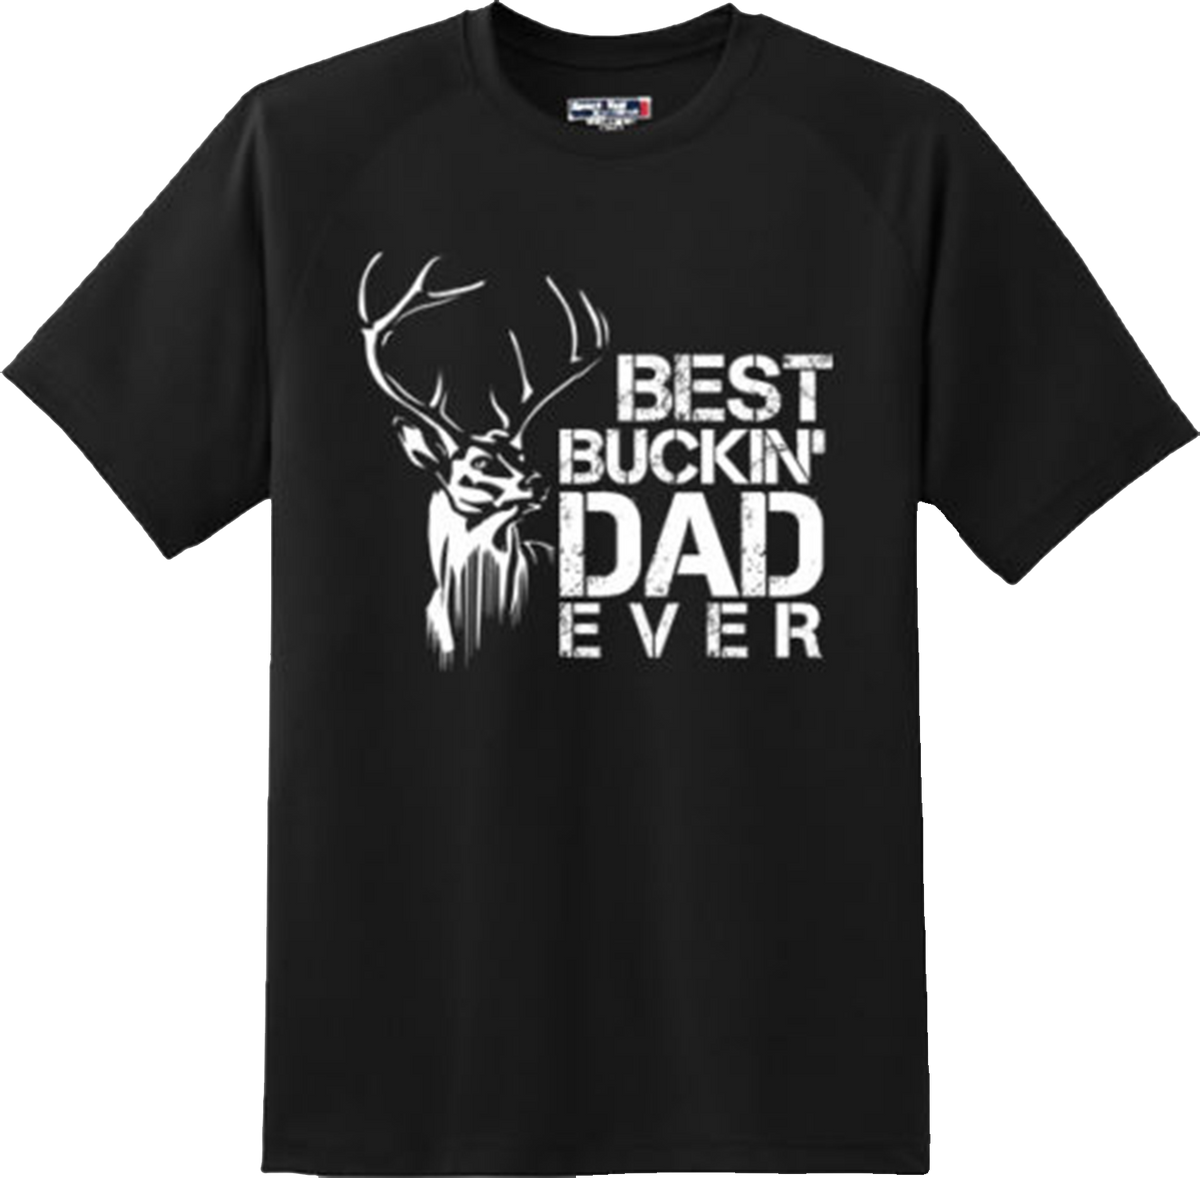 Funny Best Buckin Dad Ever T Shirt New Graphic Tee ...